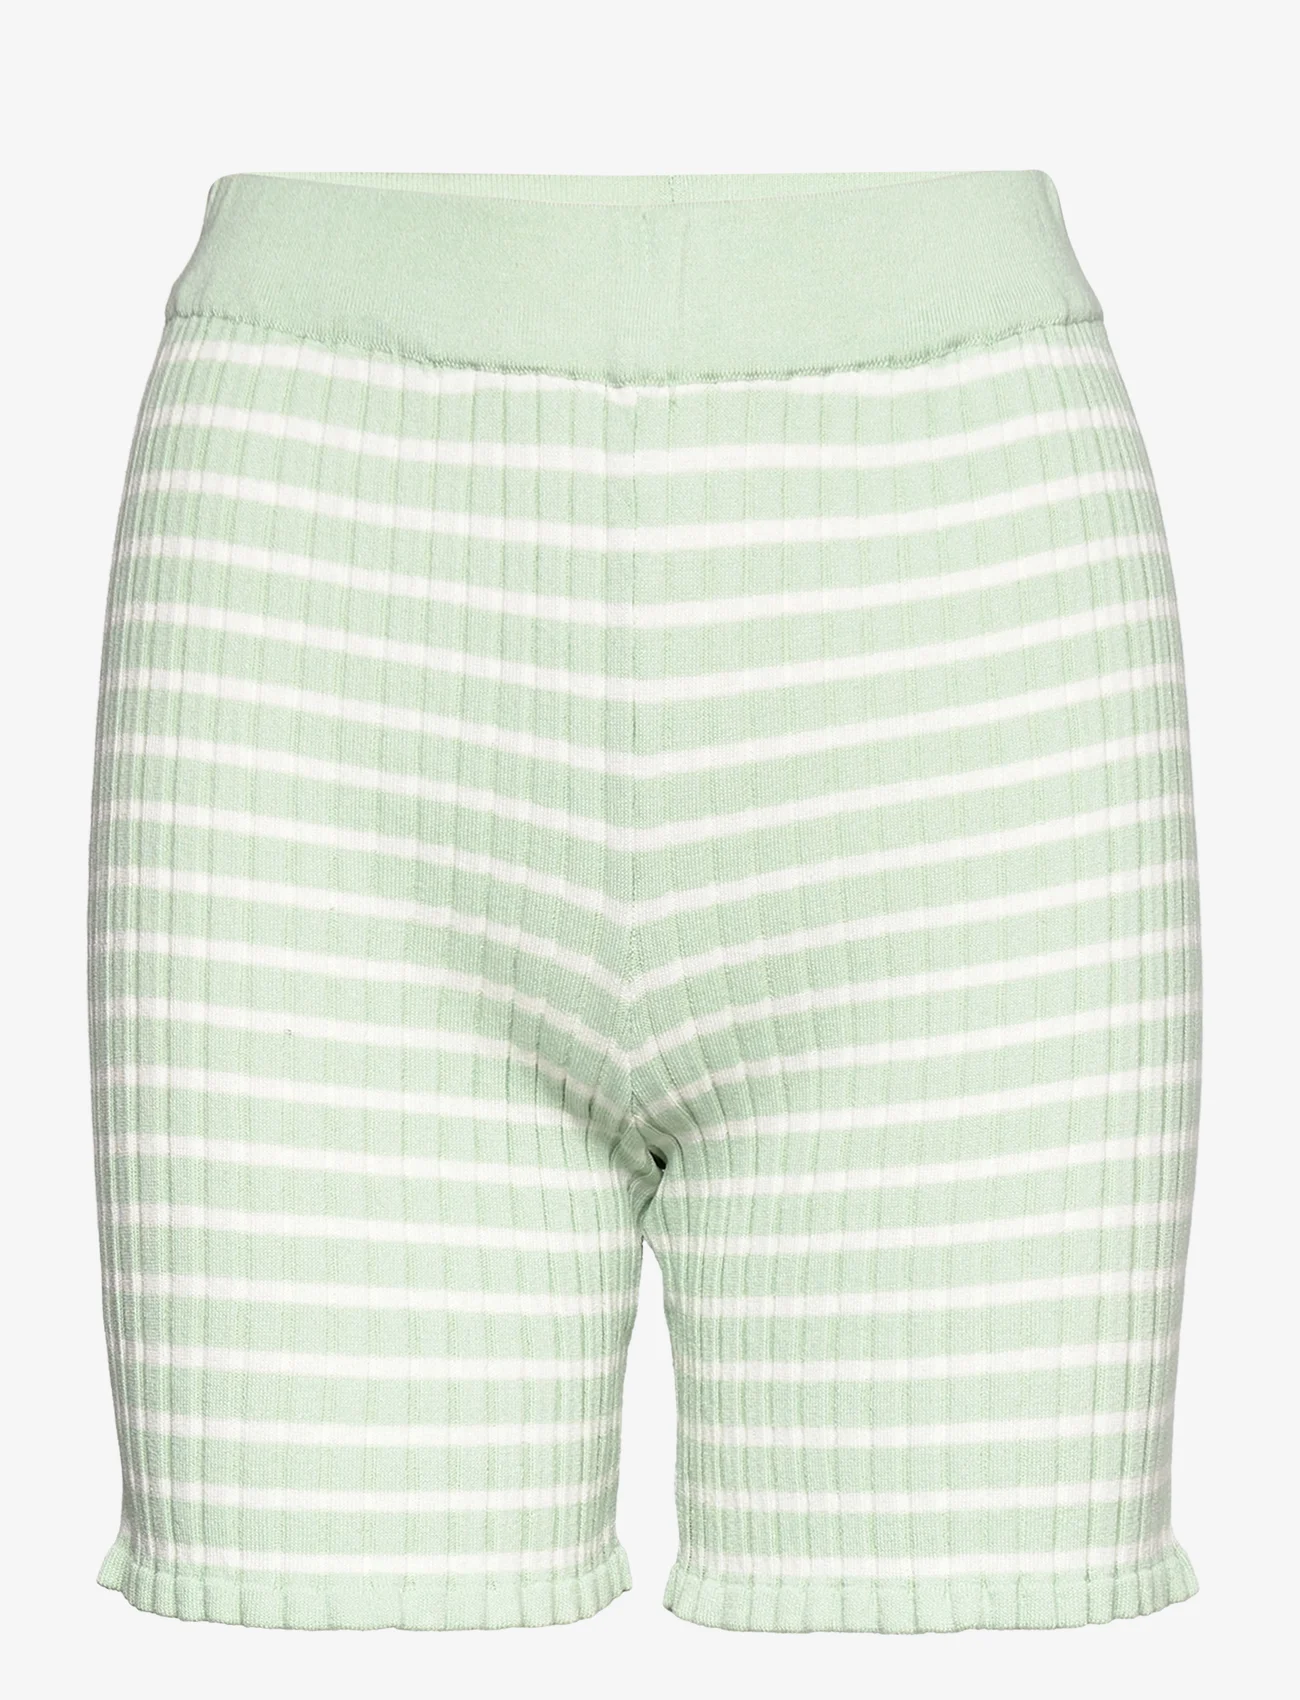 A-View - Sira shorts - lühikesed vabaajapüksid - pale mint/off white - 0